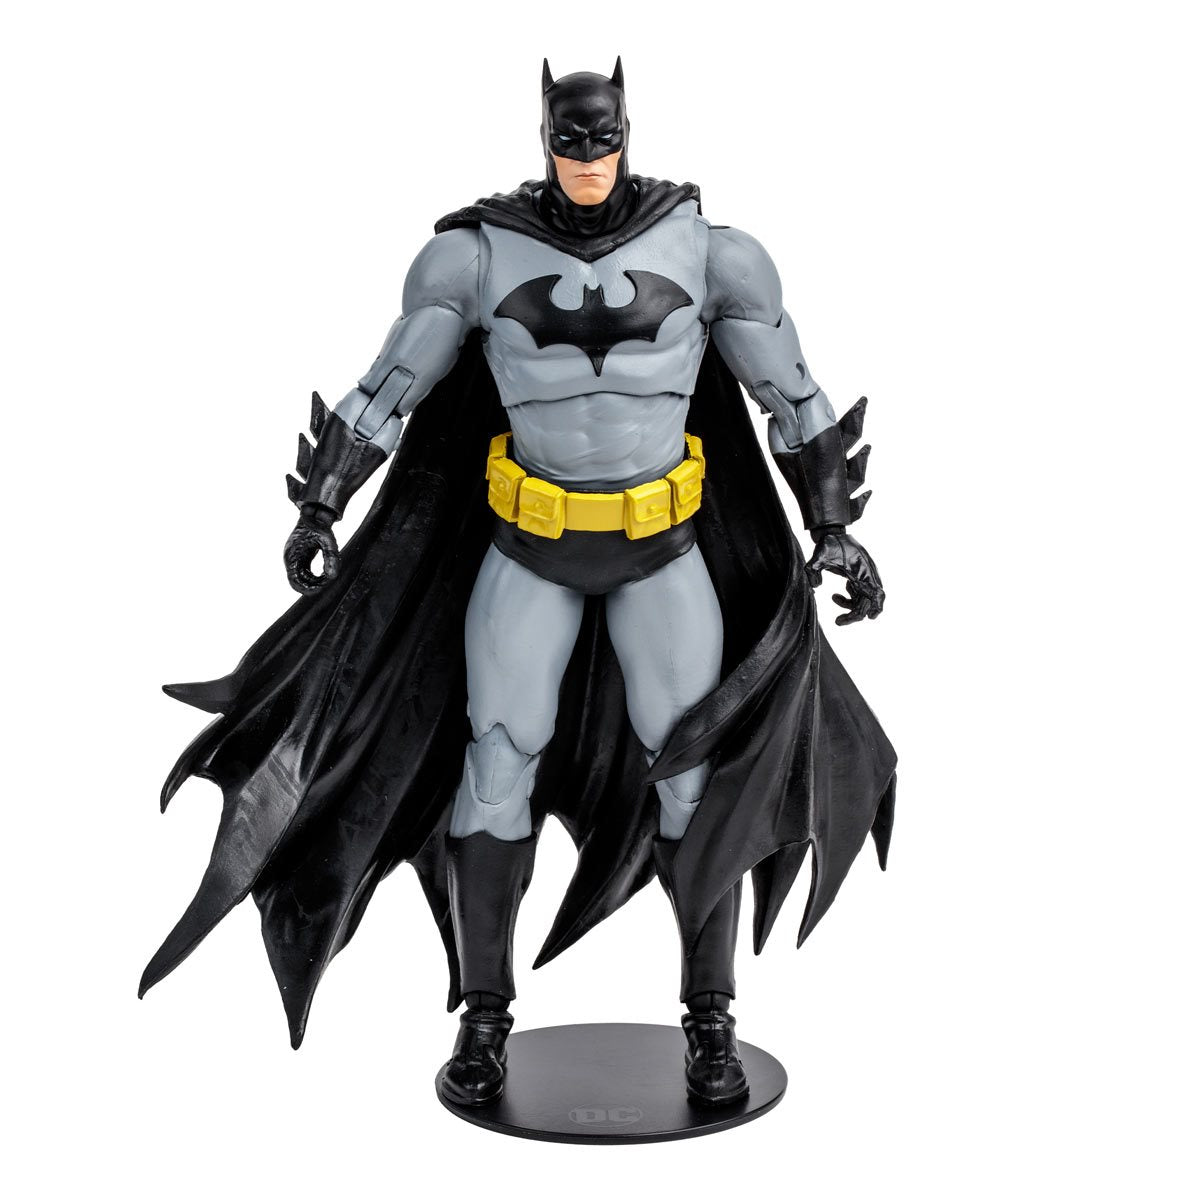 DC Multiverse Batman: Hush Black and Gray 7-Inch Scale Action Figure stading with stand - Heretoserveyou